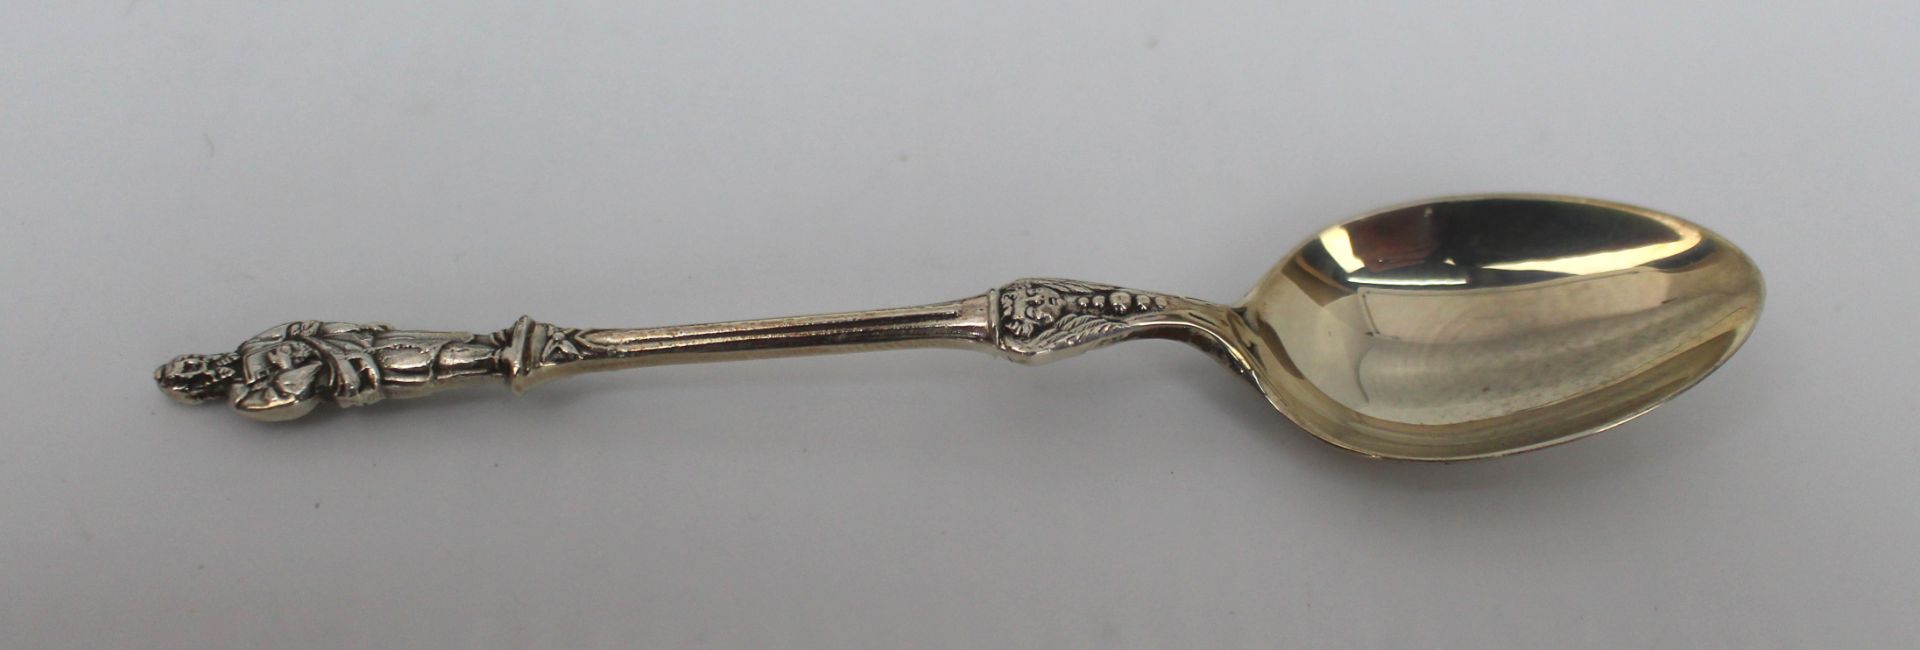 Cased Set of 12 Apostle Spoons by Charles Wilkes 1914 - Image 2 of 5